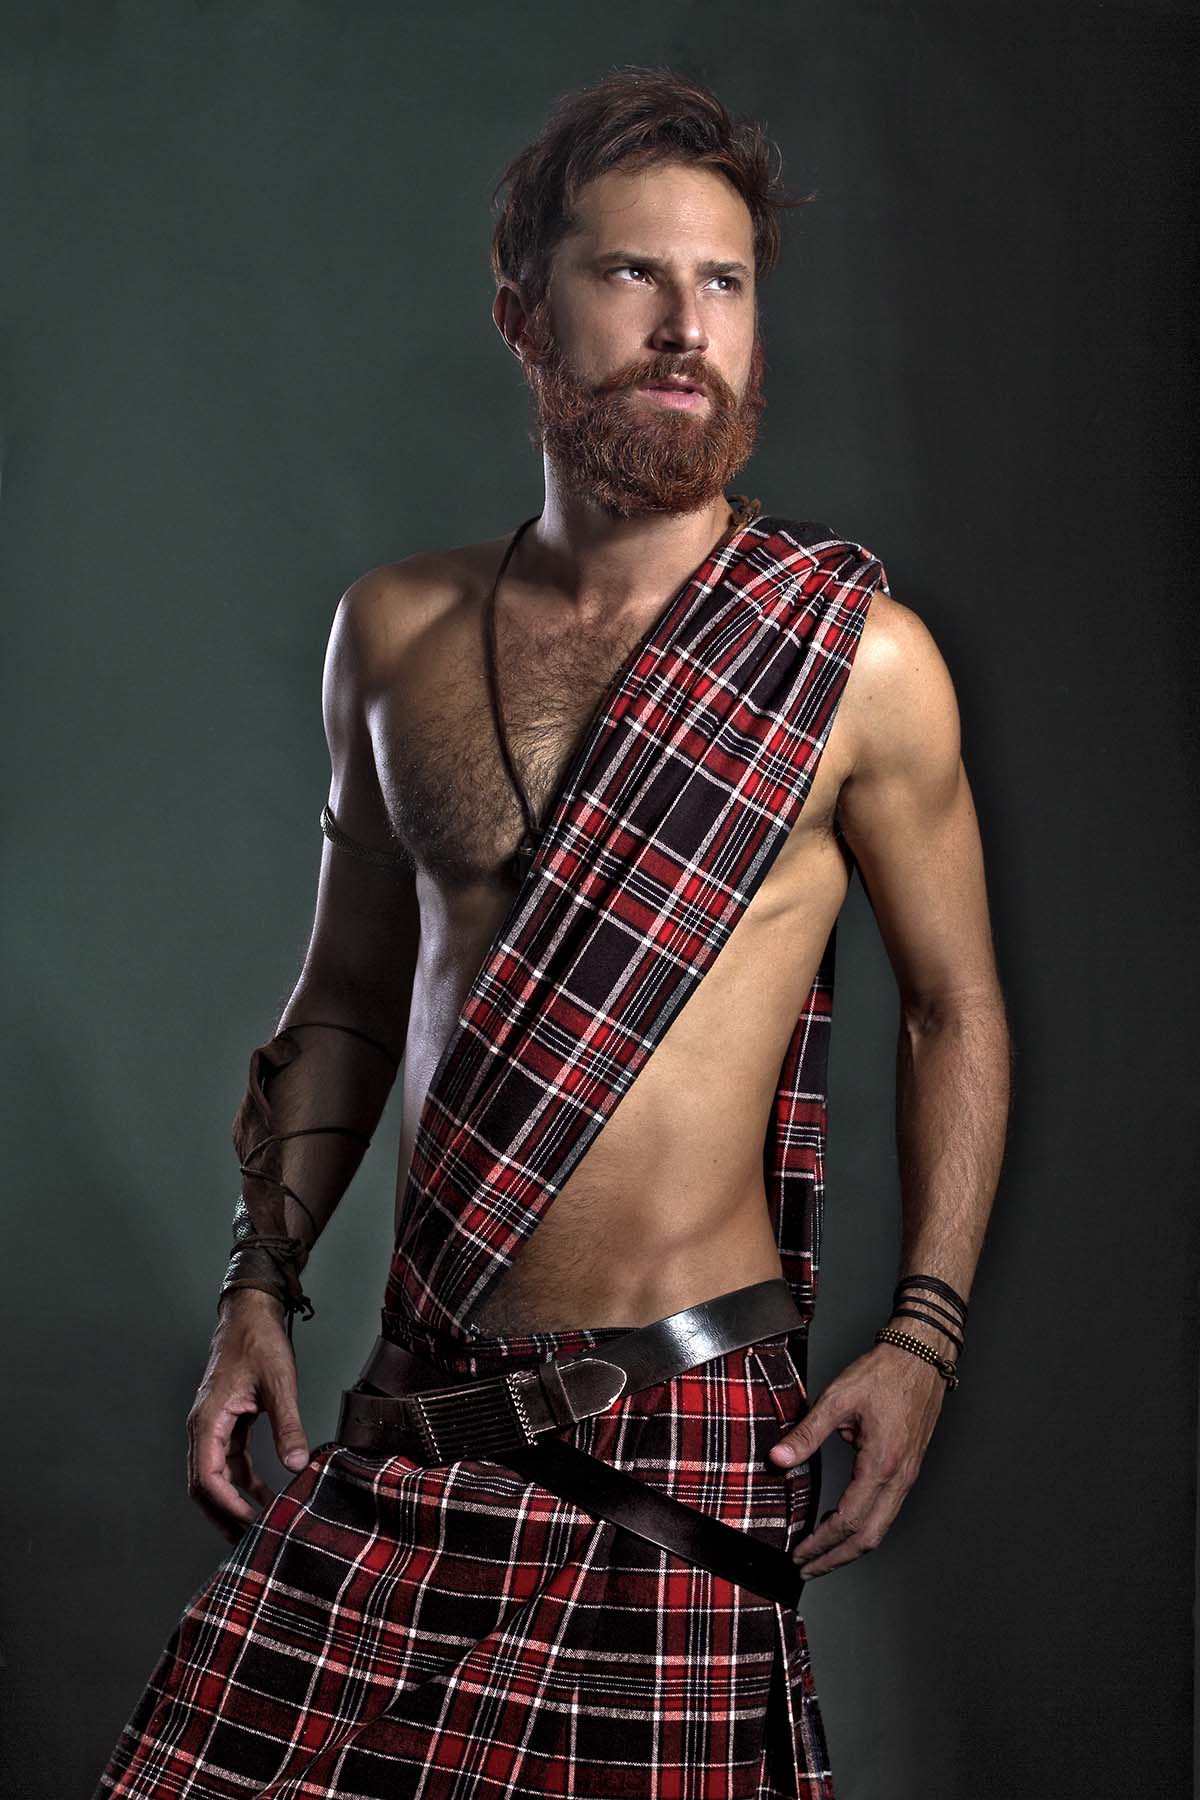 We asked people why the scots are so sexy